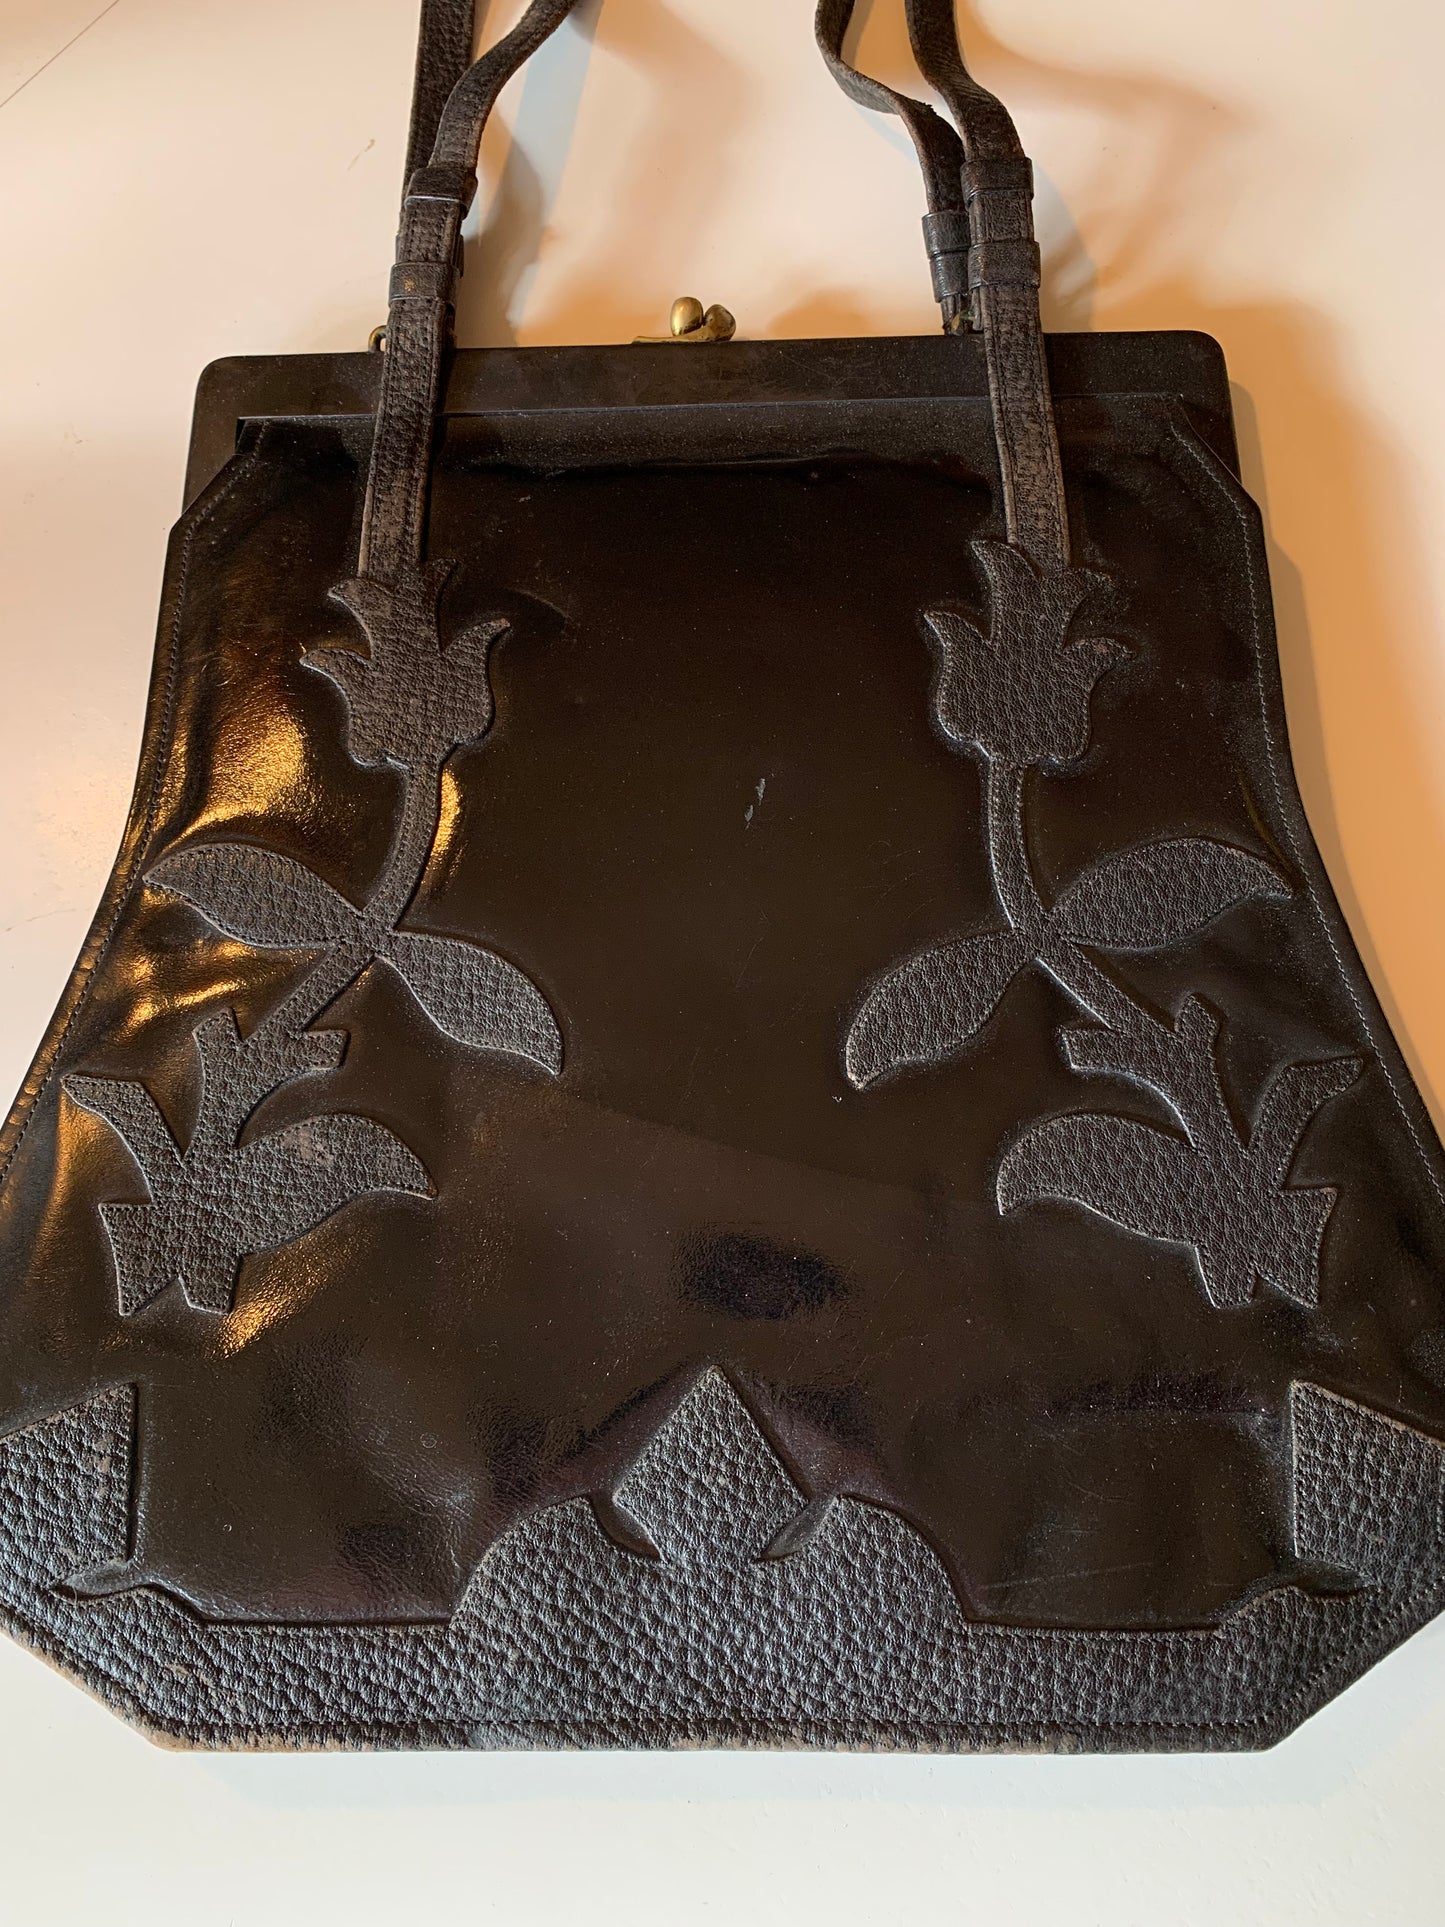 Large Black Patent Leather Handbag with Textured Leather Floral Design circa 1910s